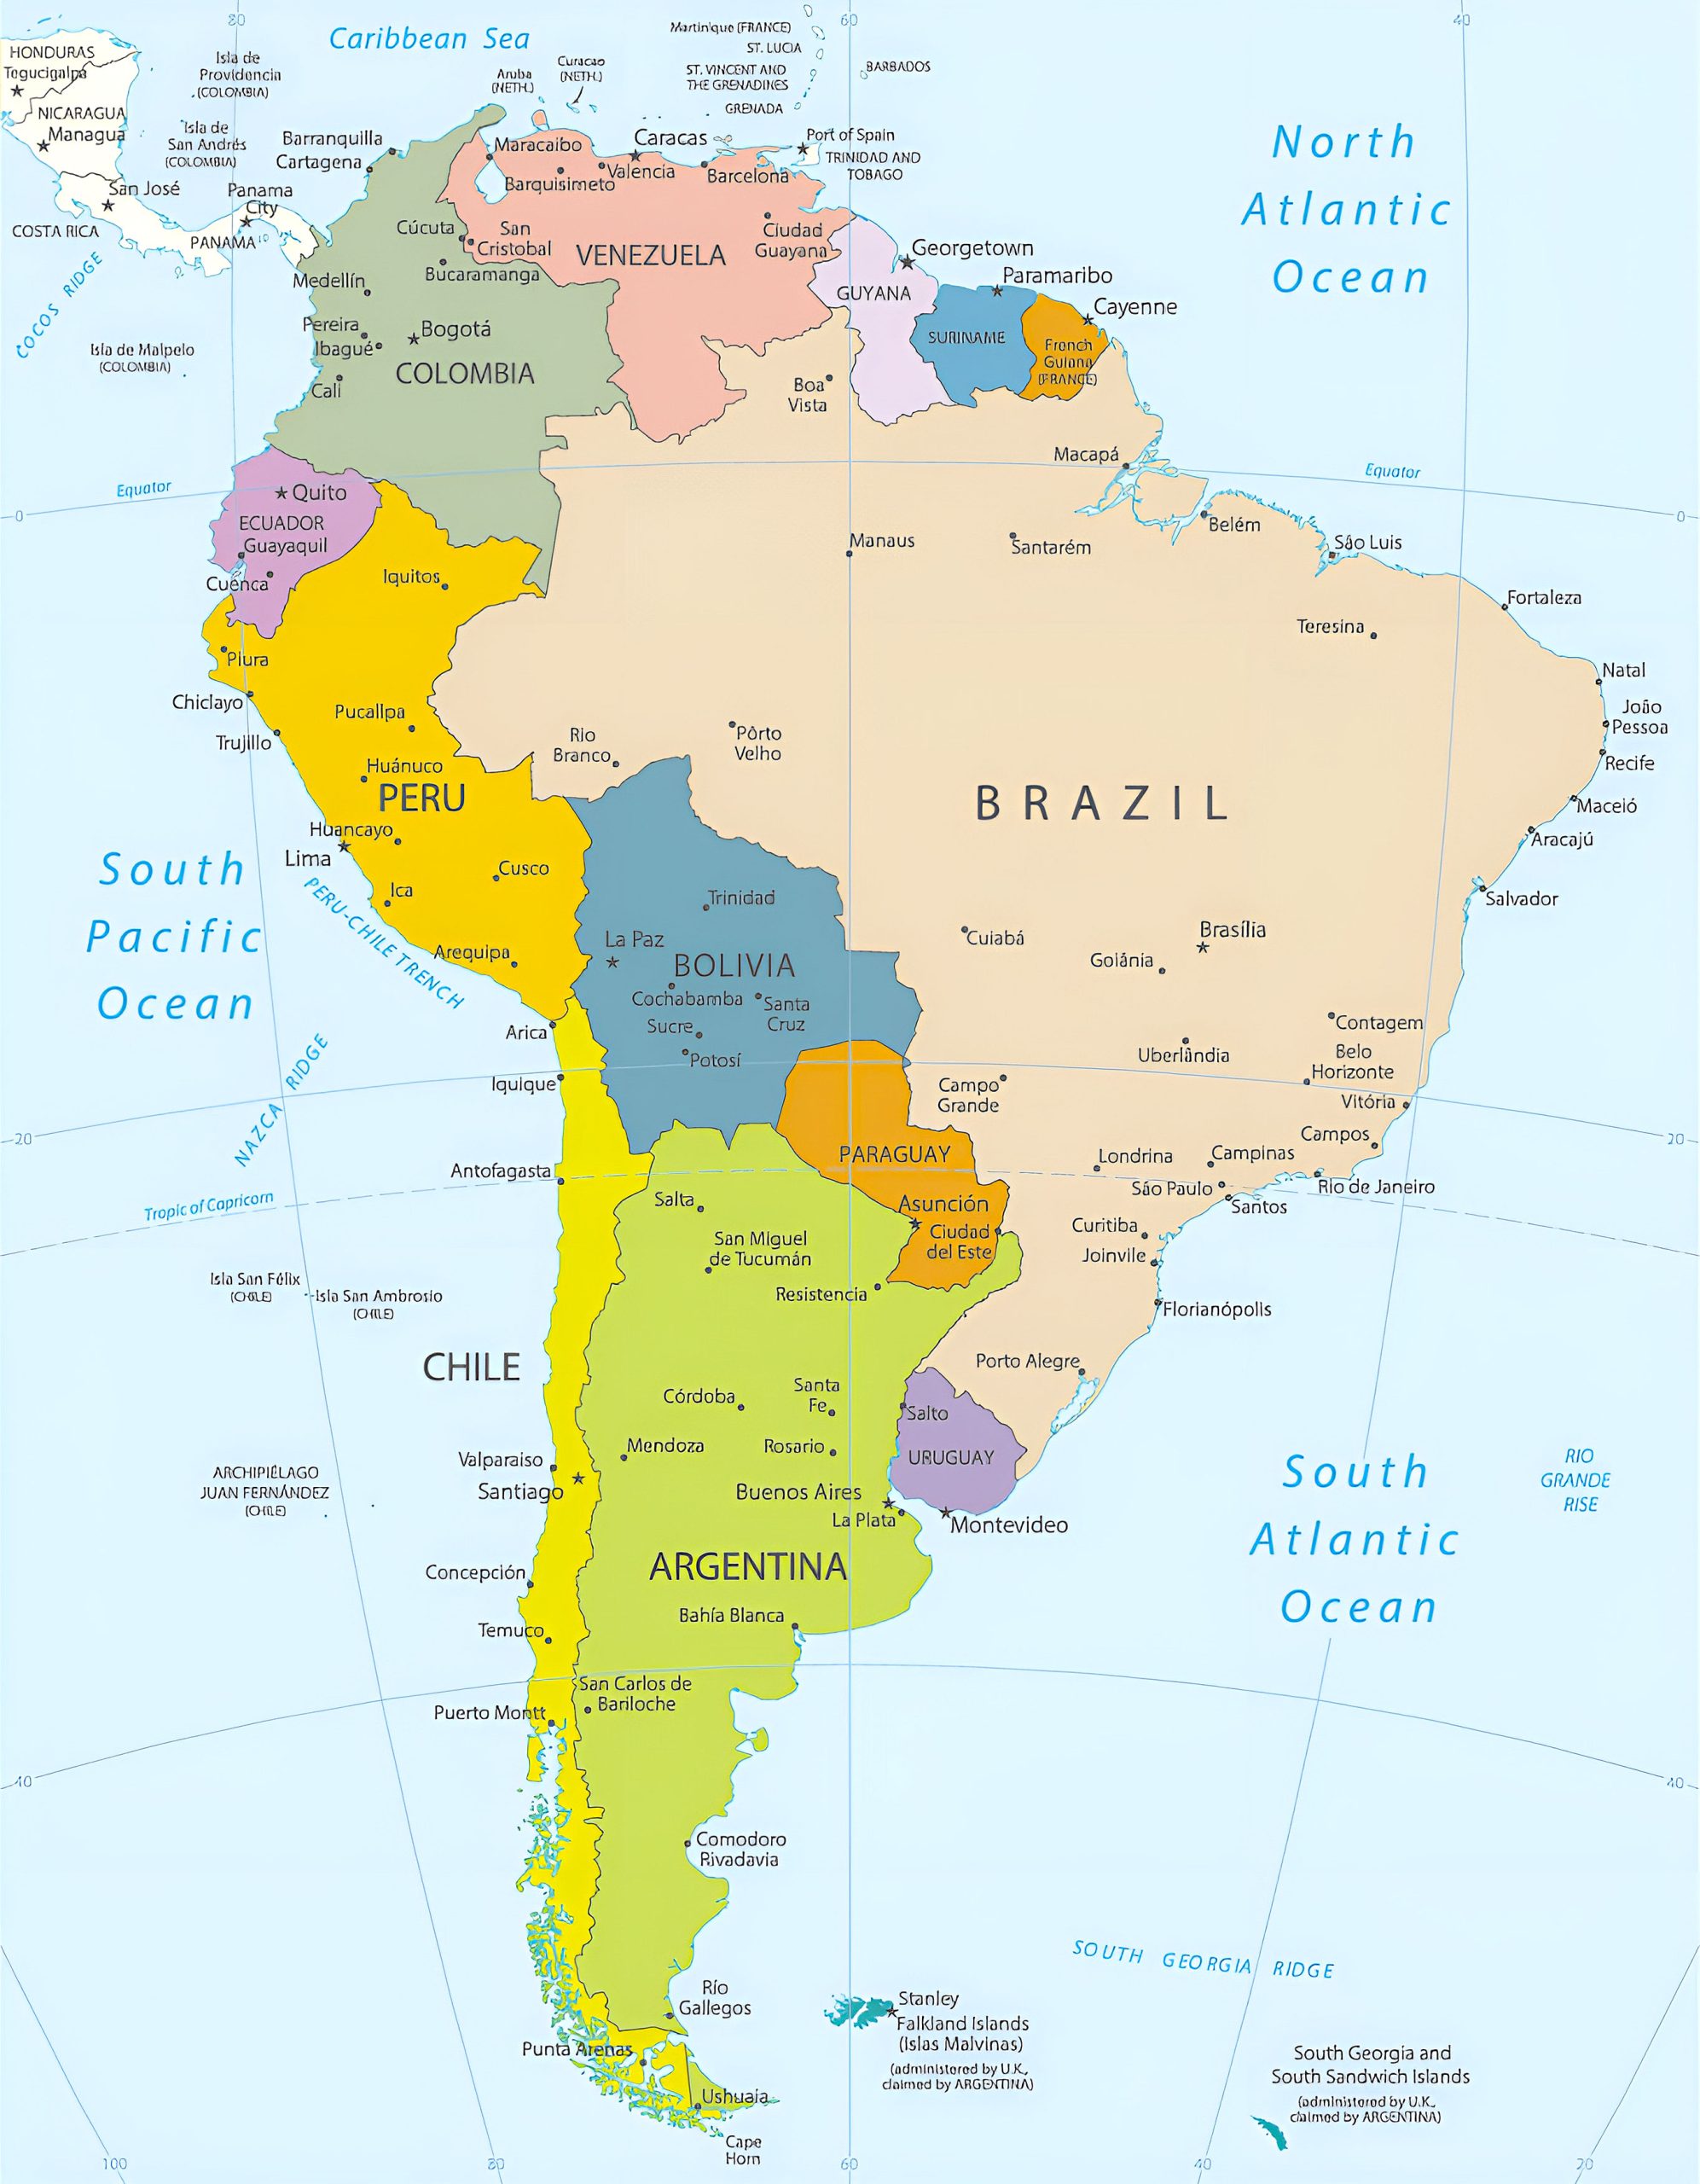 Countries, Capitals and Major Cities of the South America Map